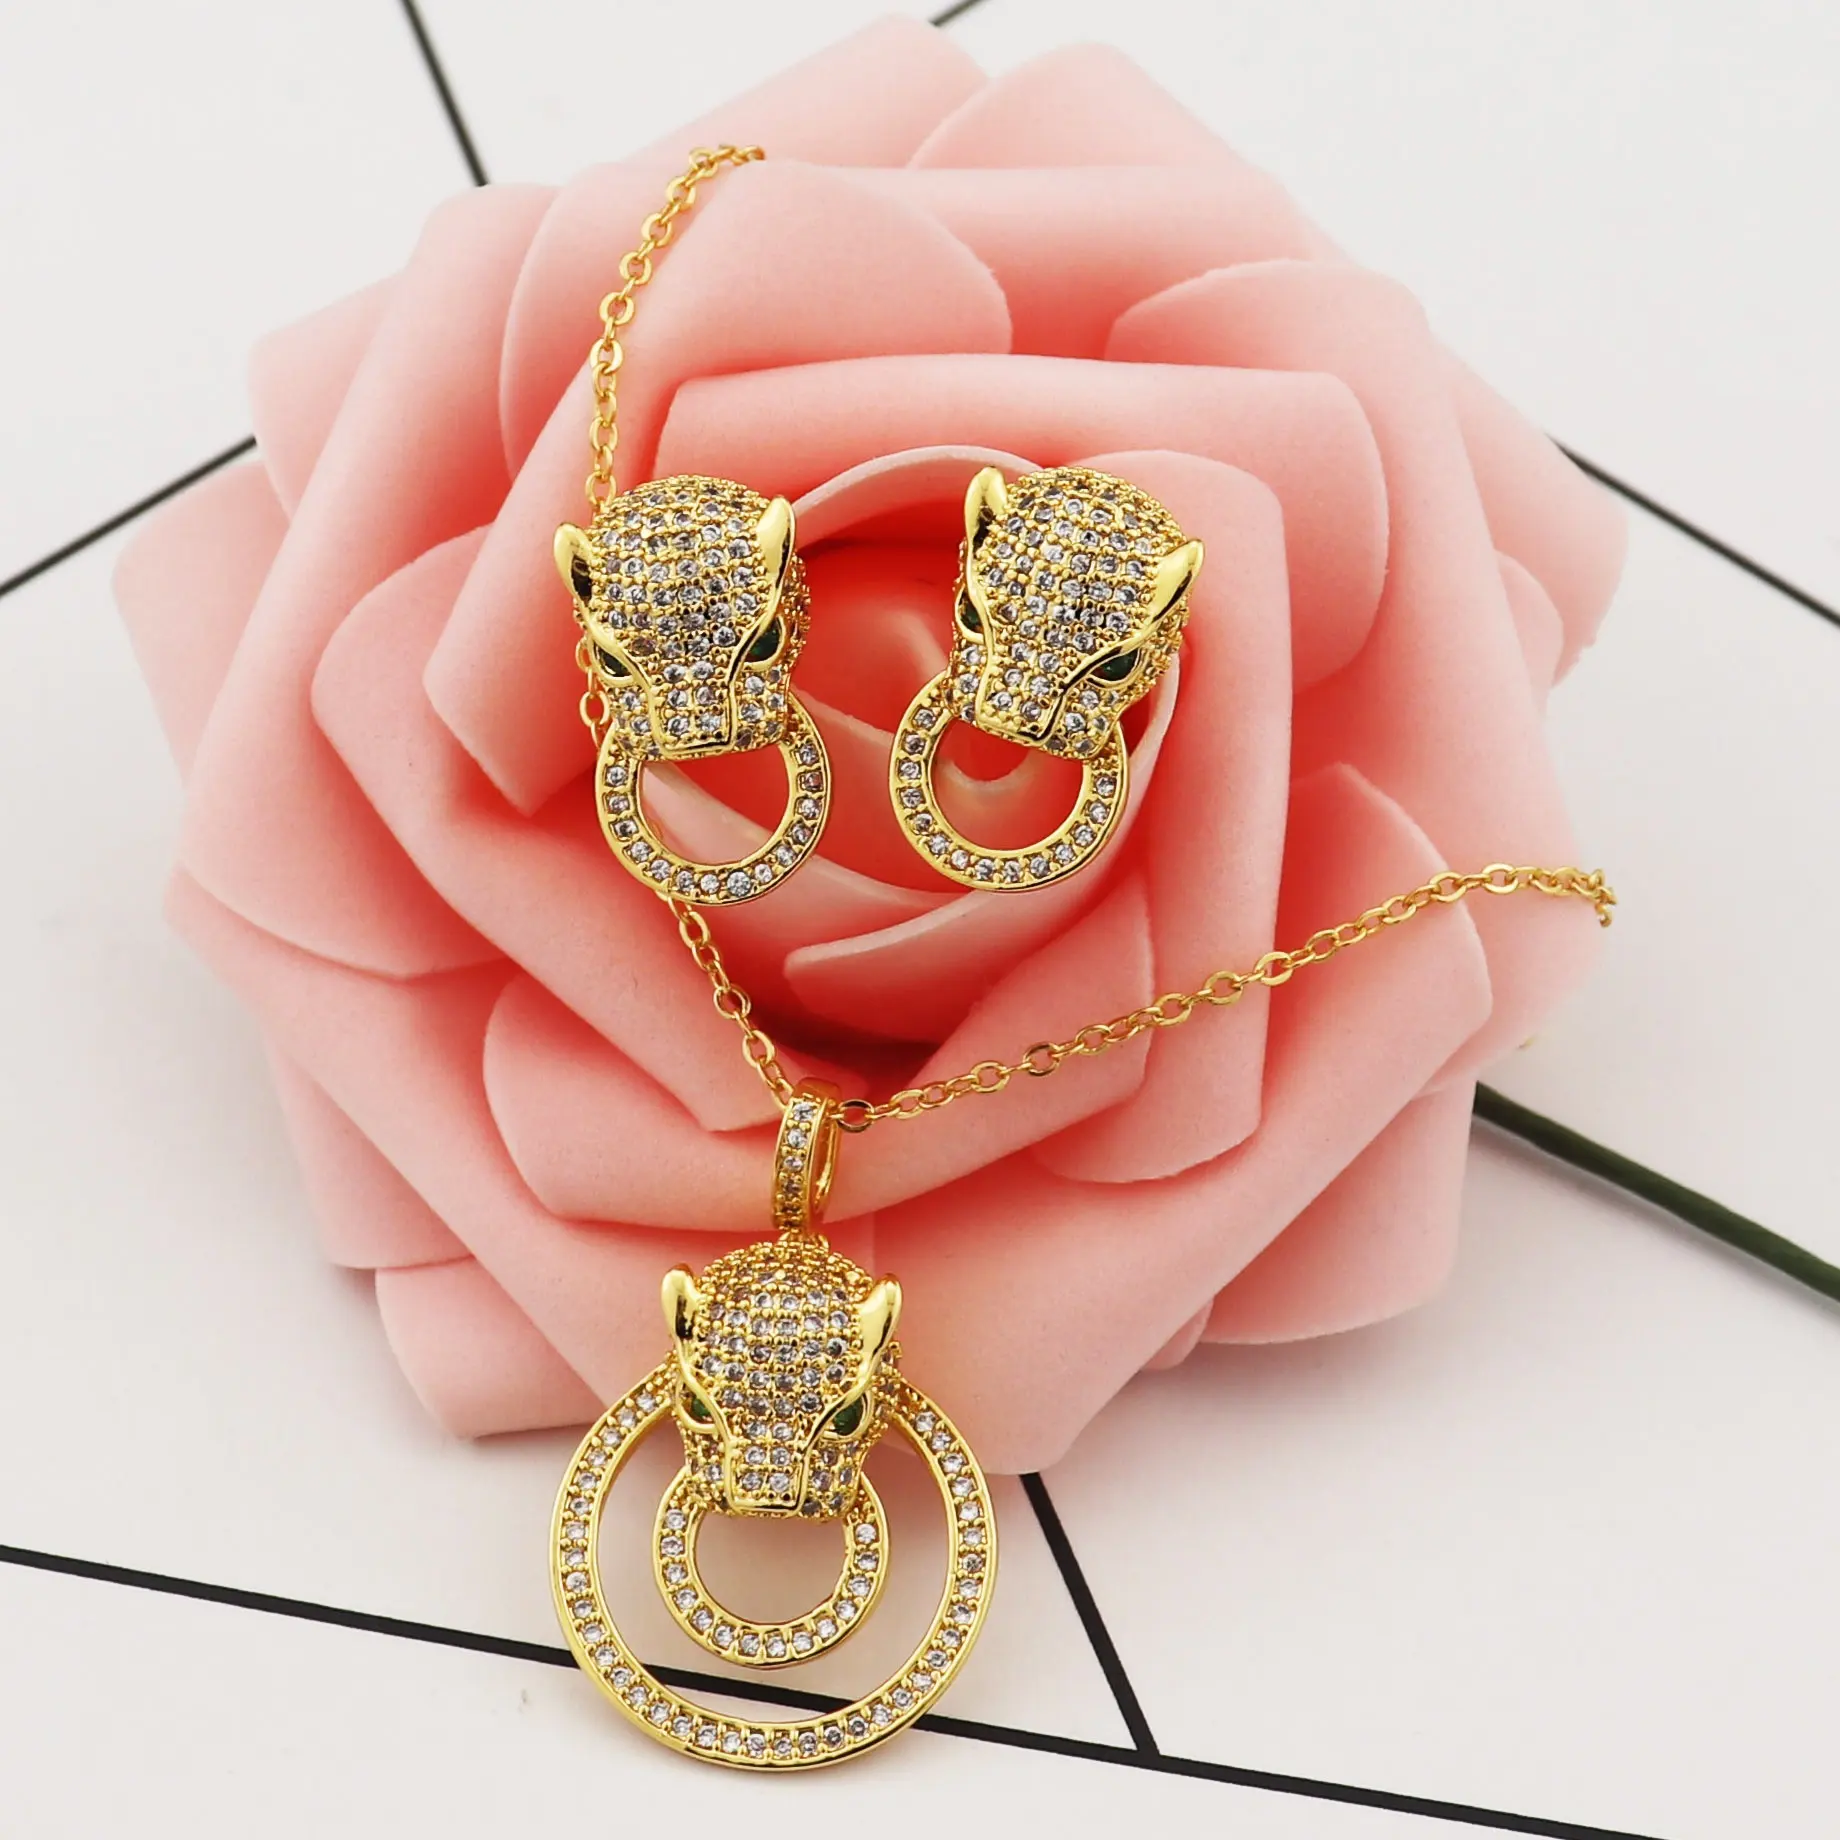 Hot sale fashion zirconia jewelry set women panther necklaces earrings plated 18k gold jewelry set